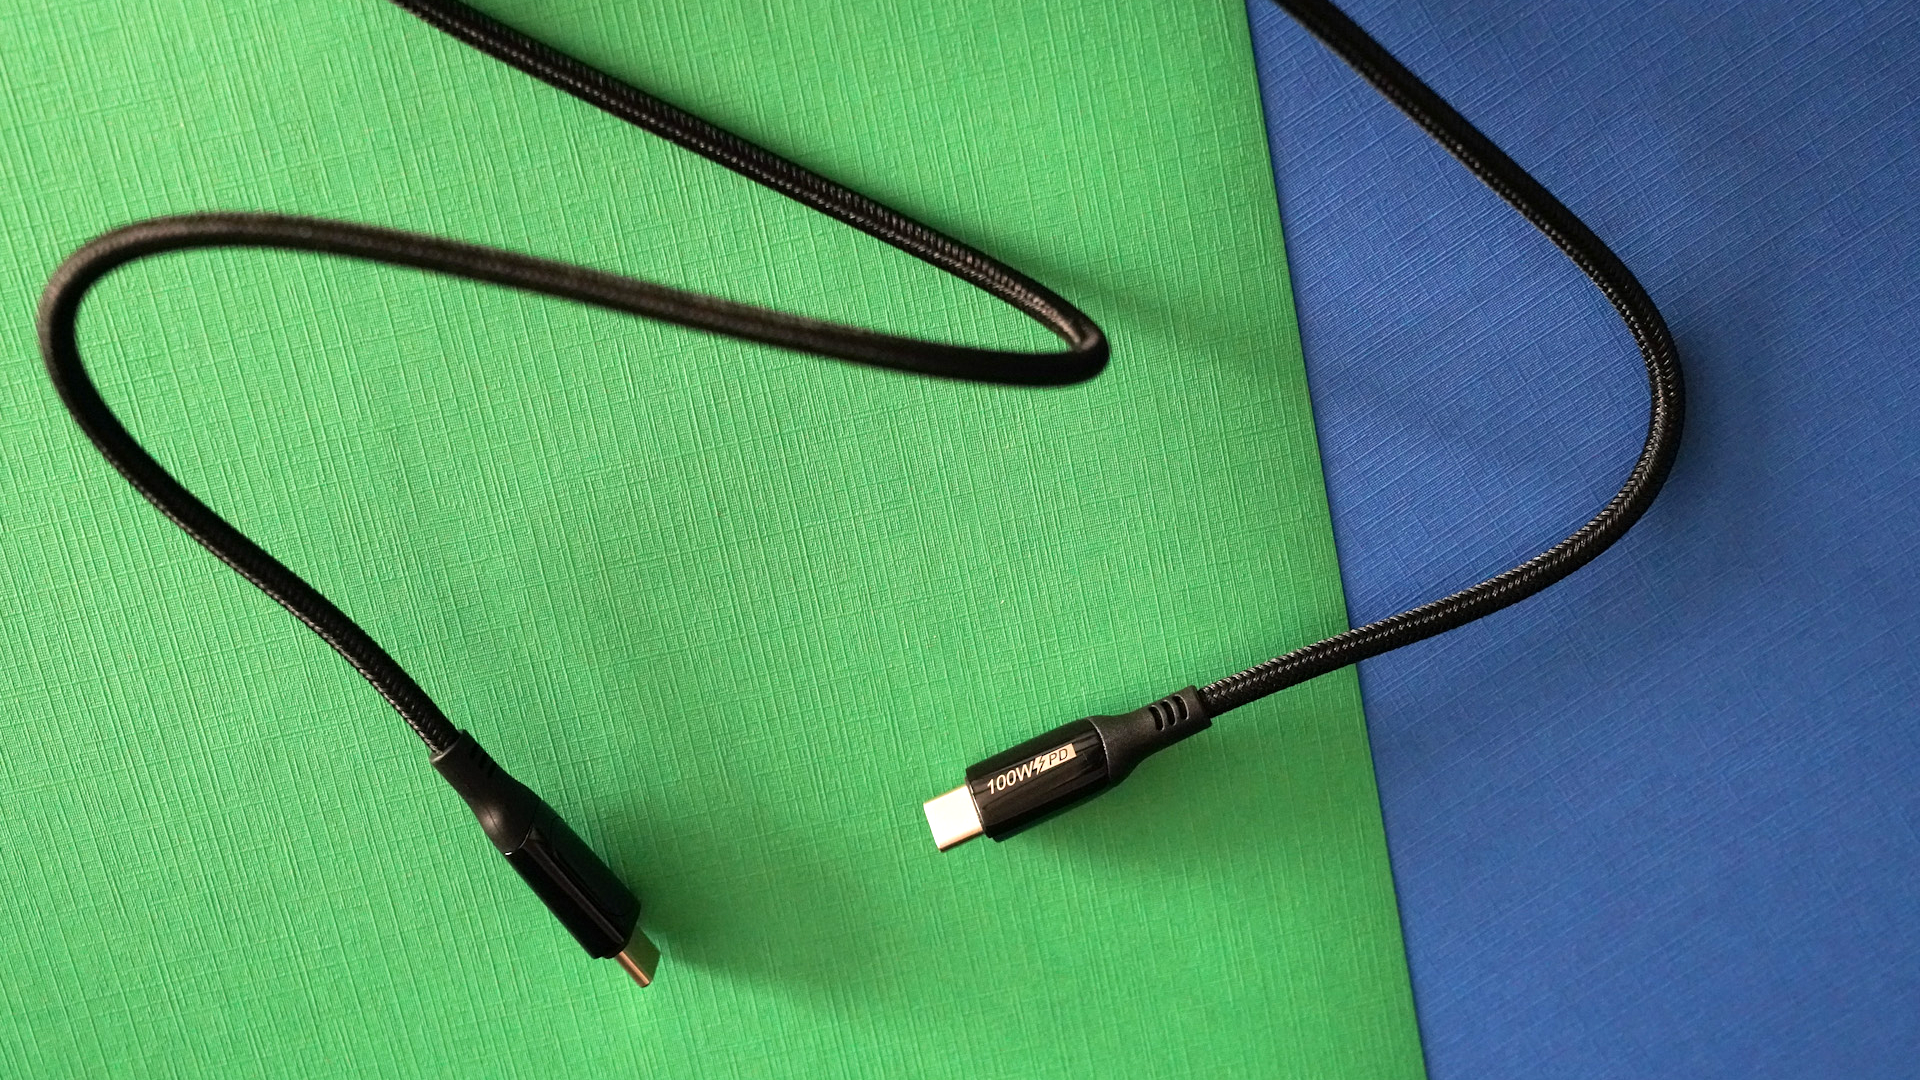 TheBoth ends of the Chipofy LED Power Display cable unplugged atop a colorful background